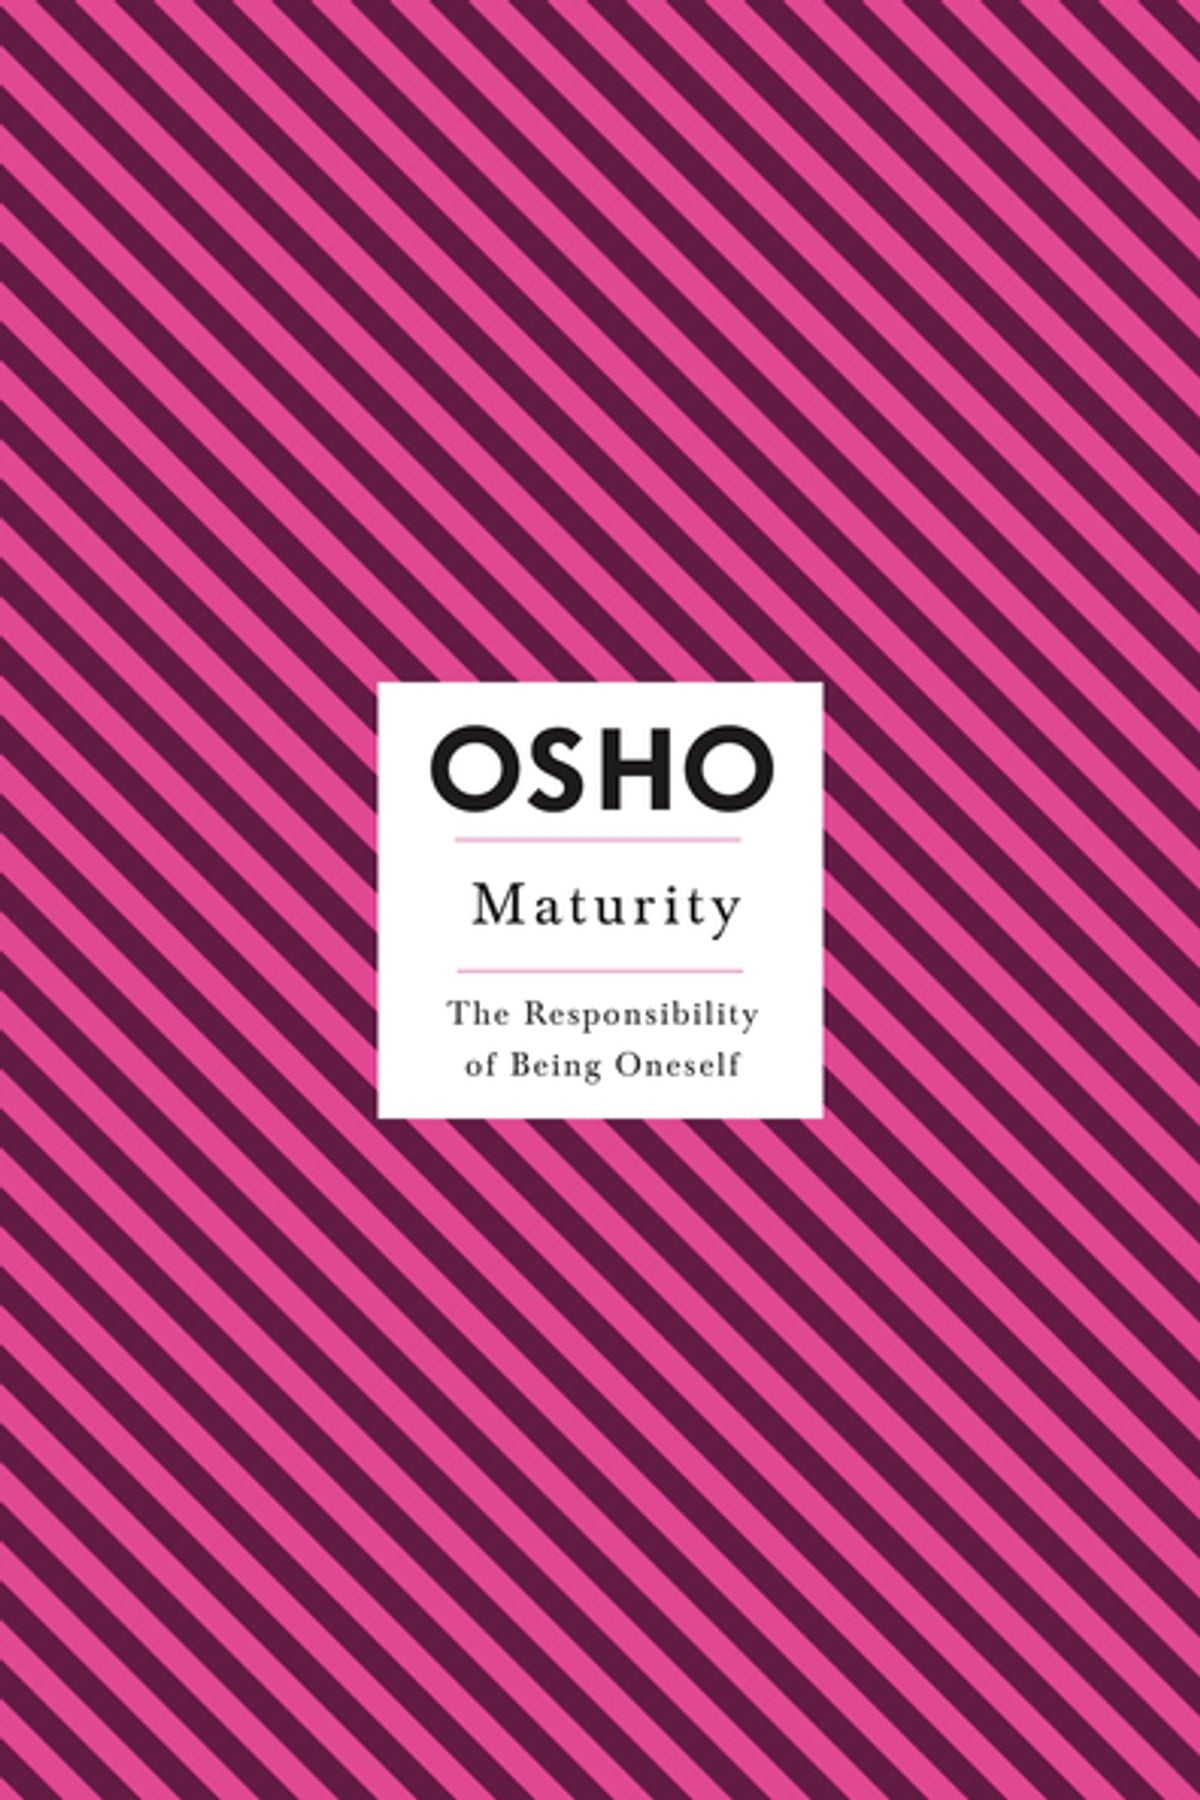 Maturity: The Responsibility of Being Oneself by Osho